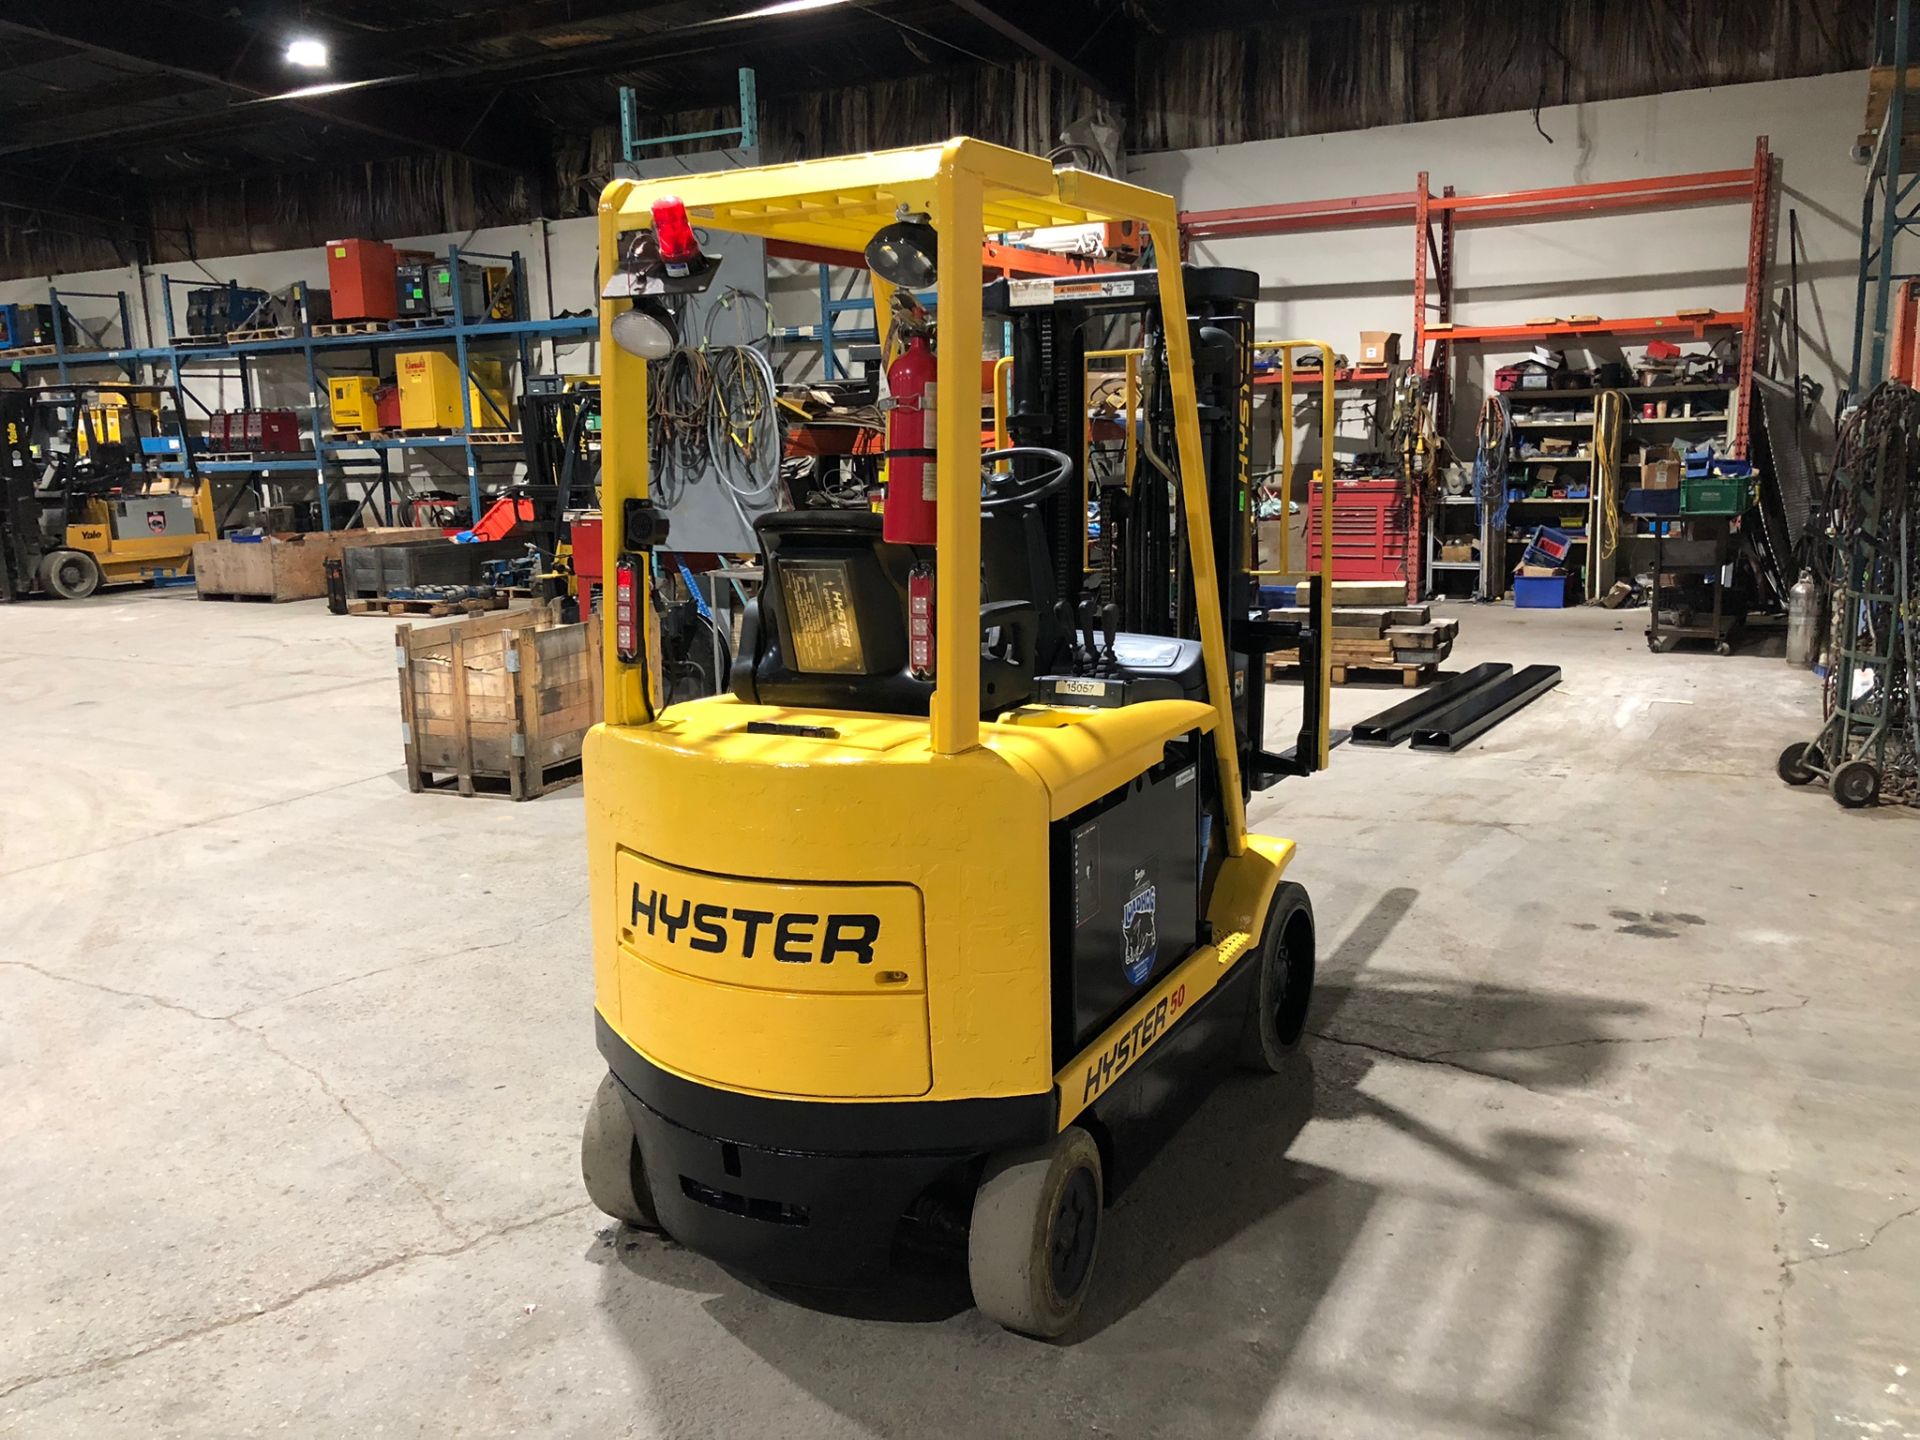 NICE Hyster 50 - 5,000lbs Capacity Forklift Electric with Sideshift 3-stage mast 48V - FREE CUSTOMS - Image 3 of 5